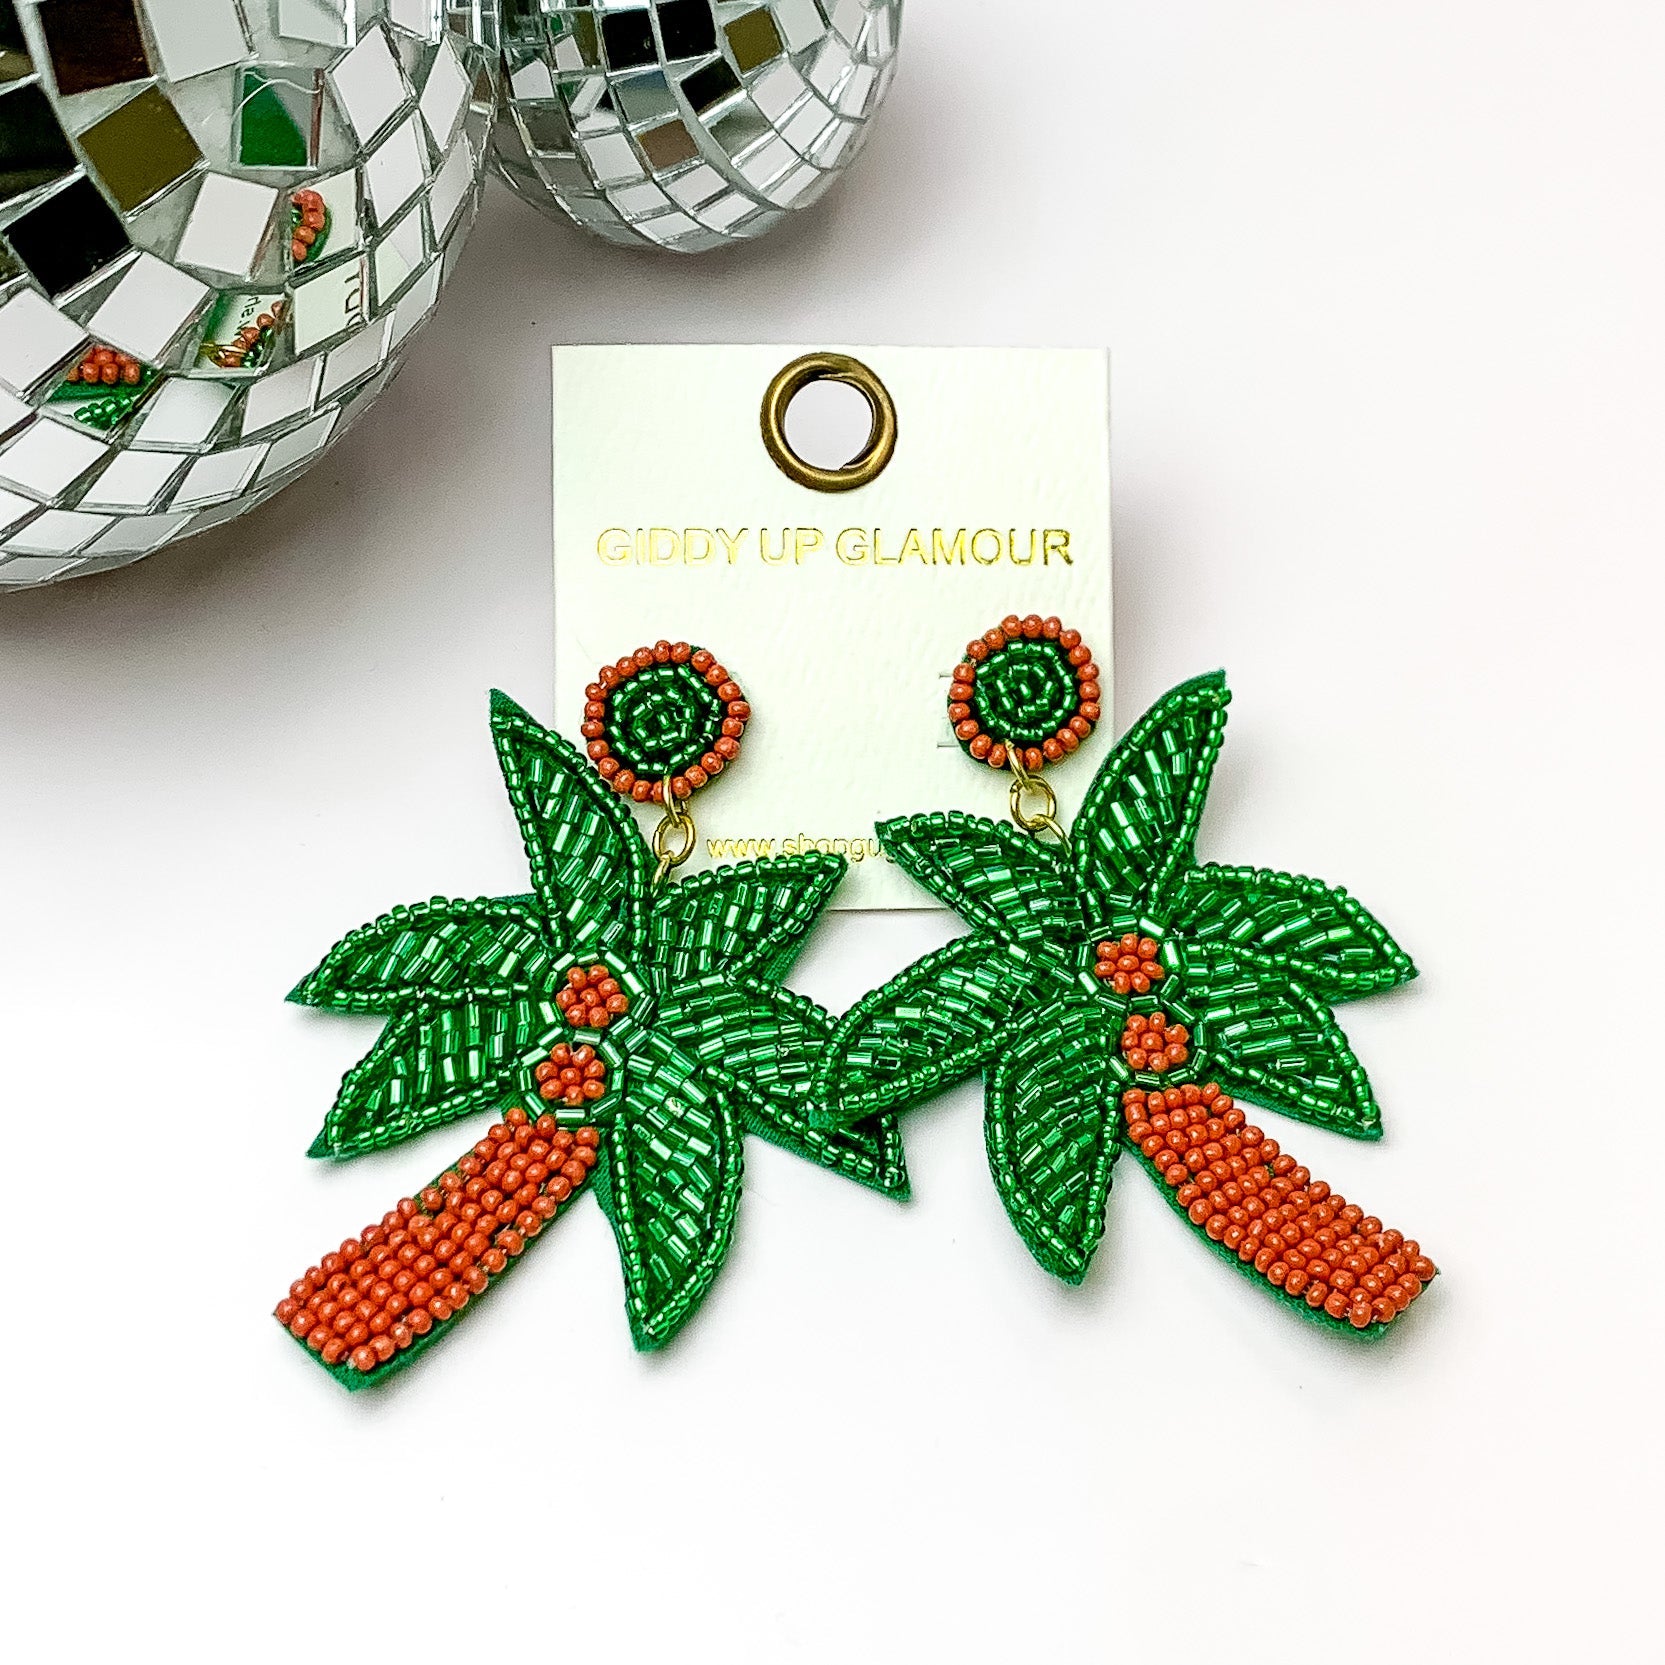 Bright green beaded palm tree earrings. Pictured on a white background with disco balls in the top left corner.